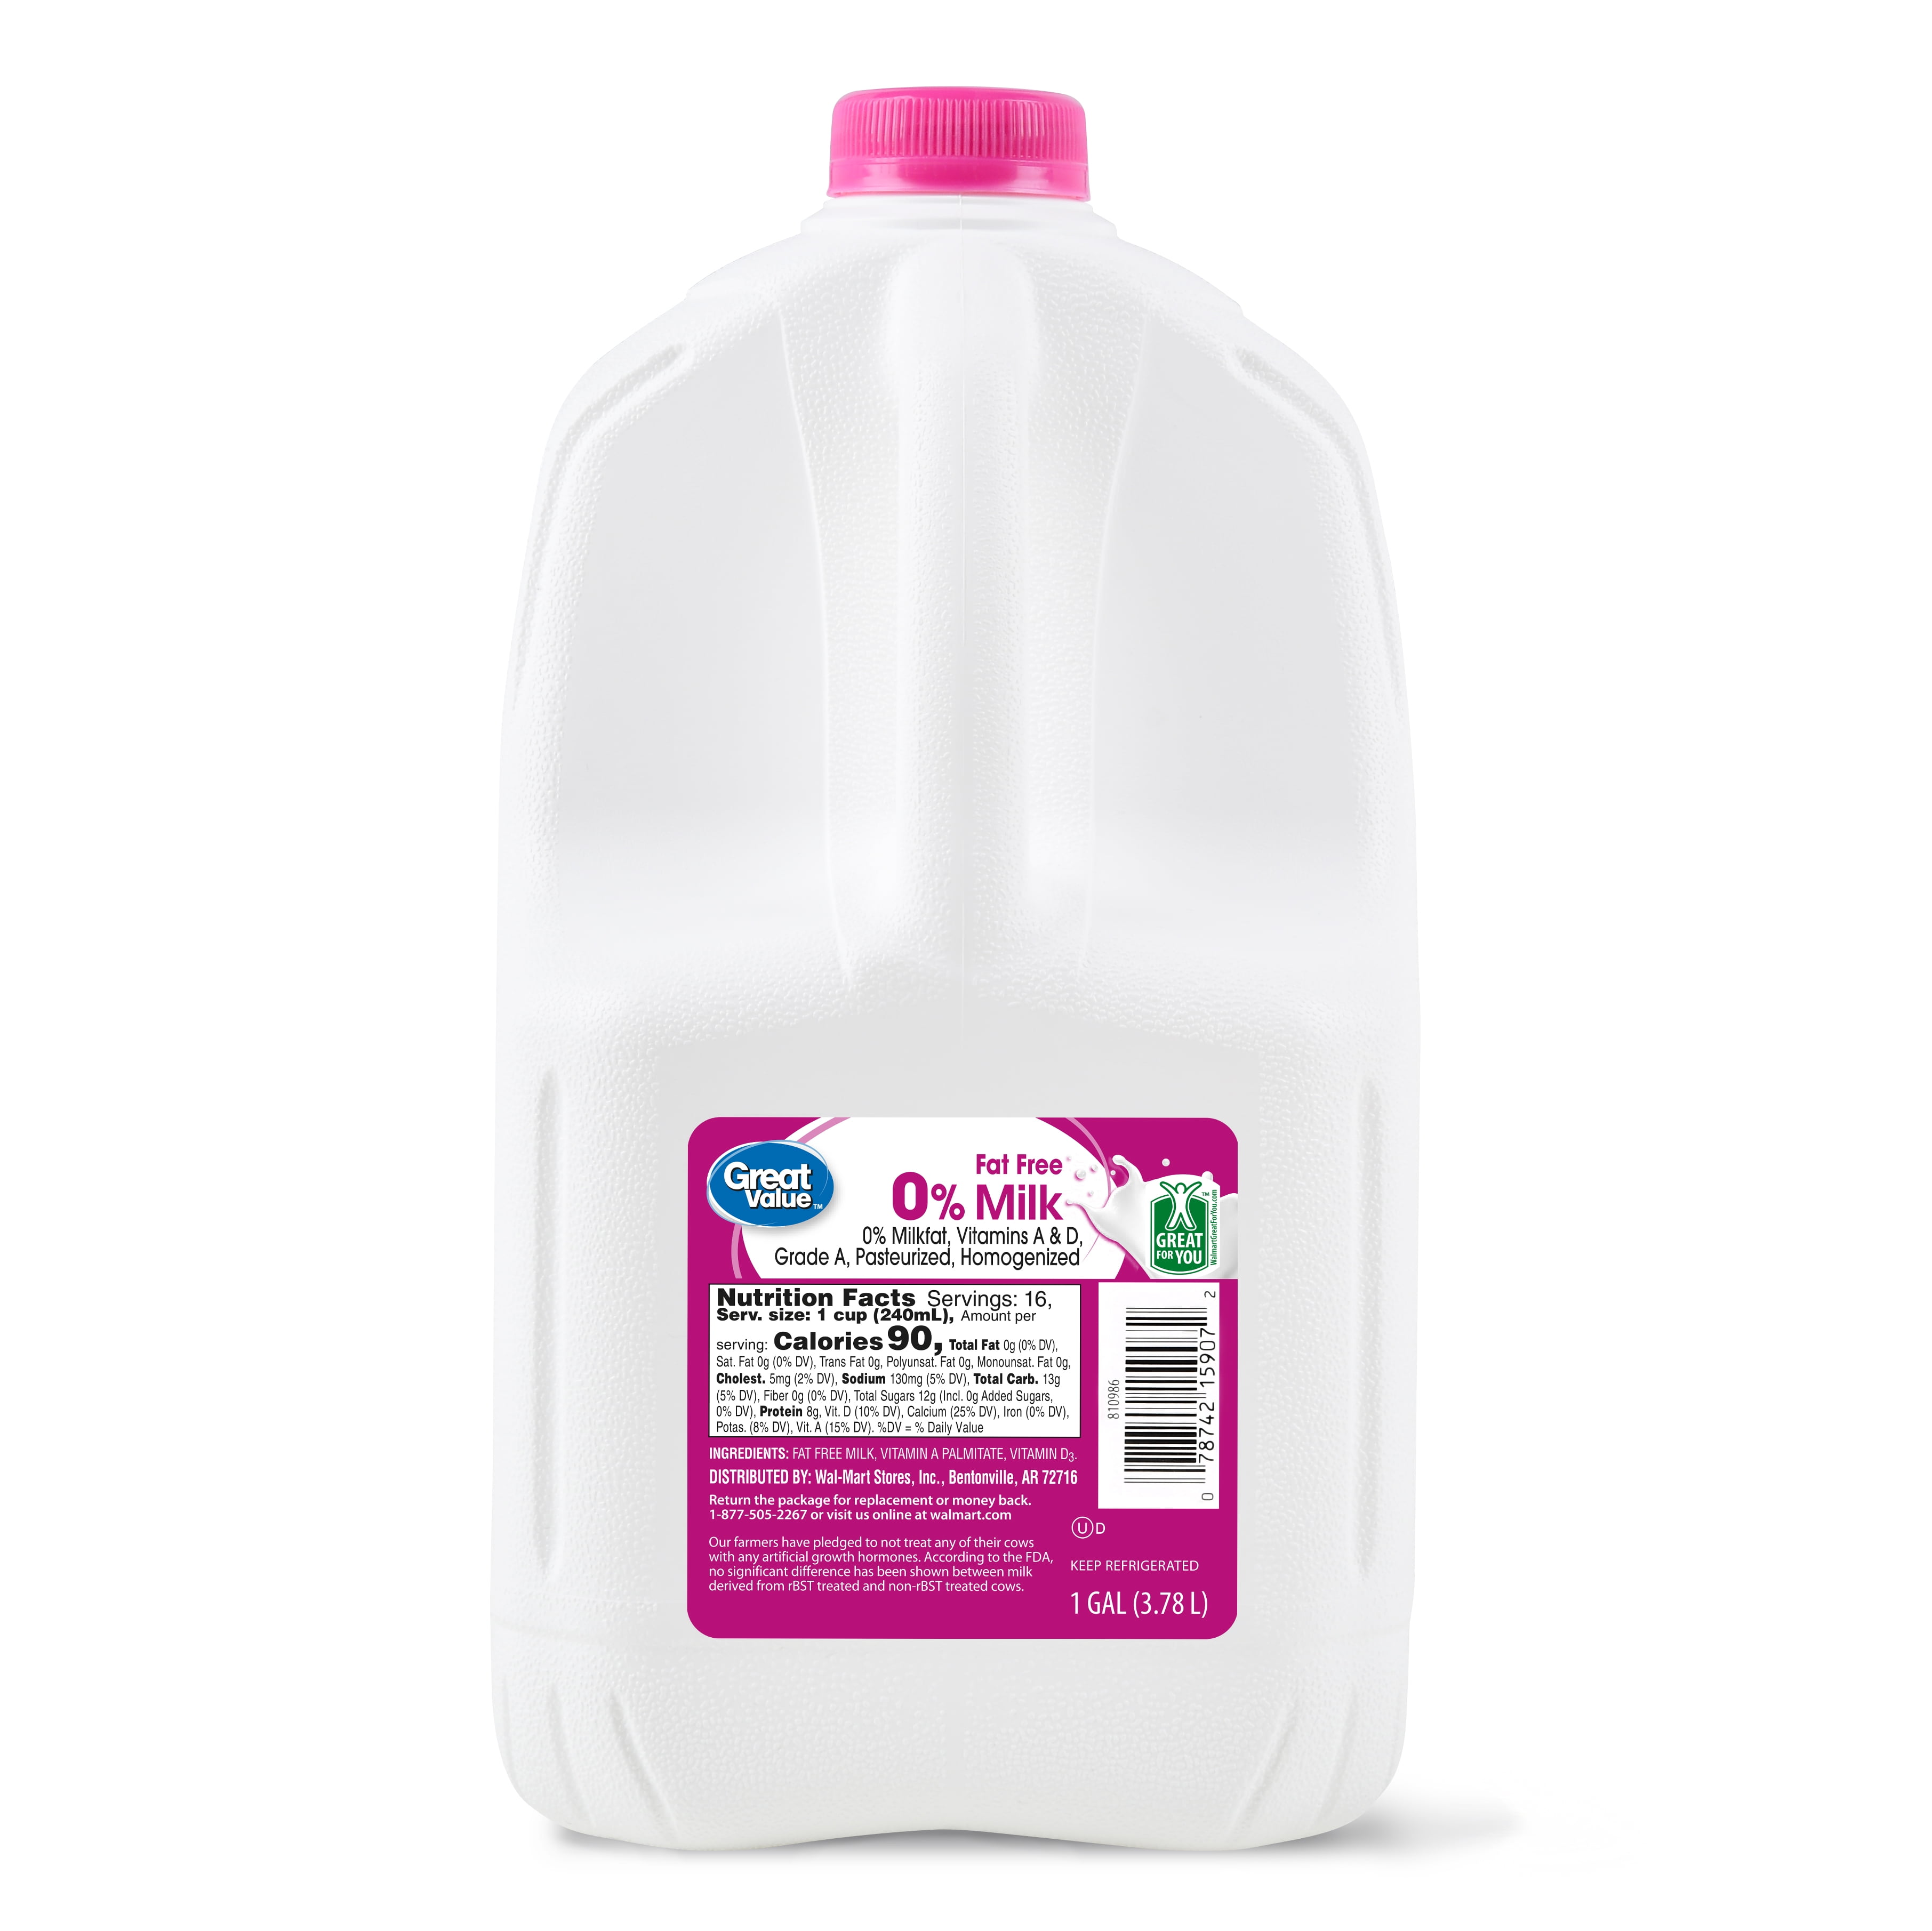 Buy Great Value Fat Free Milk Gallon 128 Fl Oz Online At Lowest Price